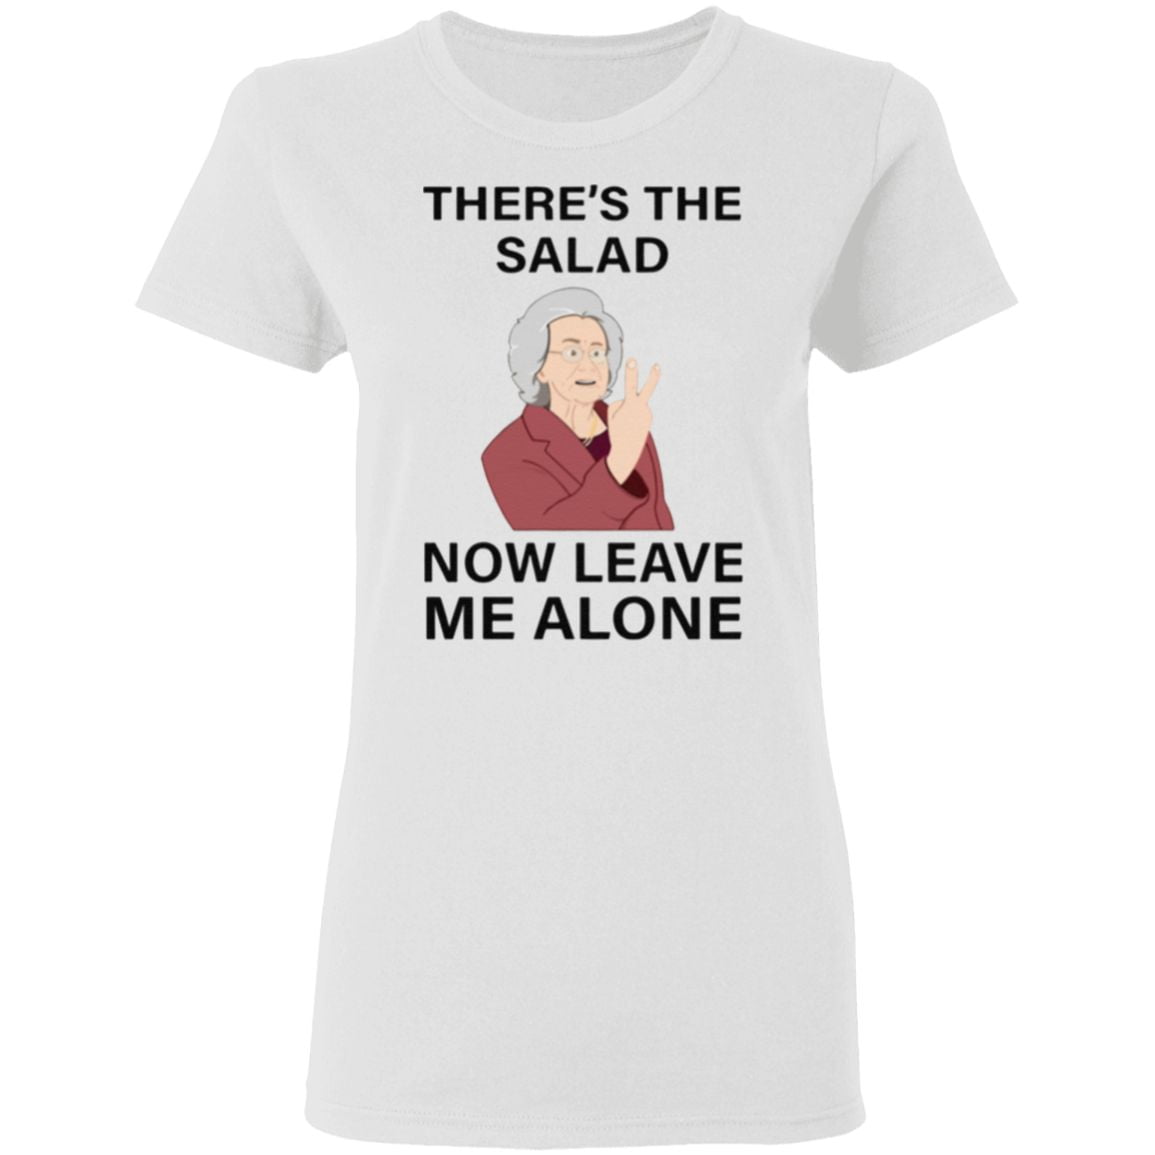 There’s The Salad Now Leave Me Alone TShirt